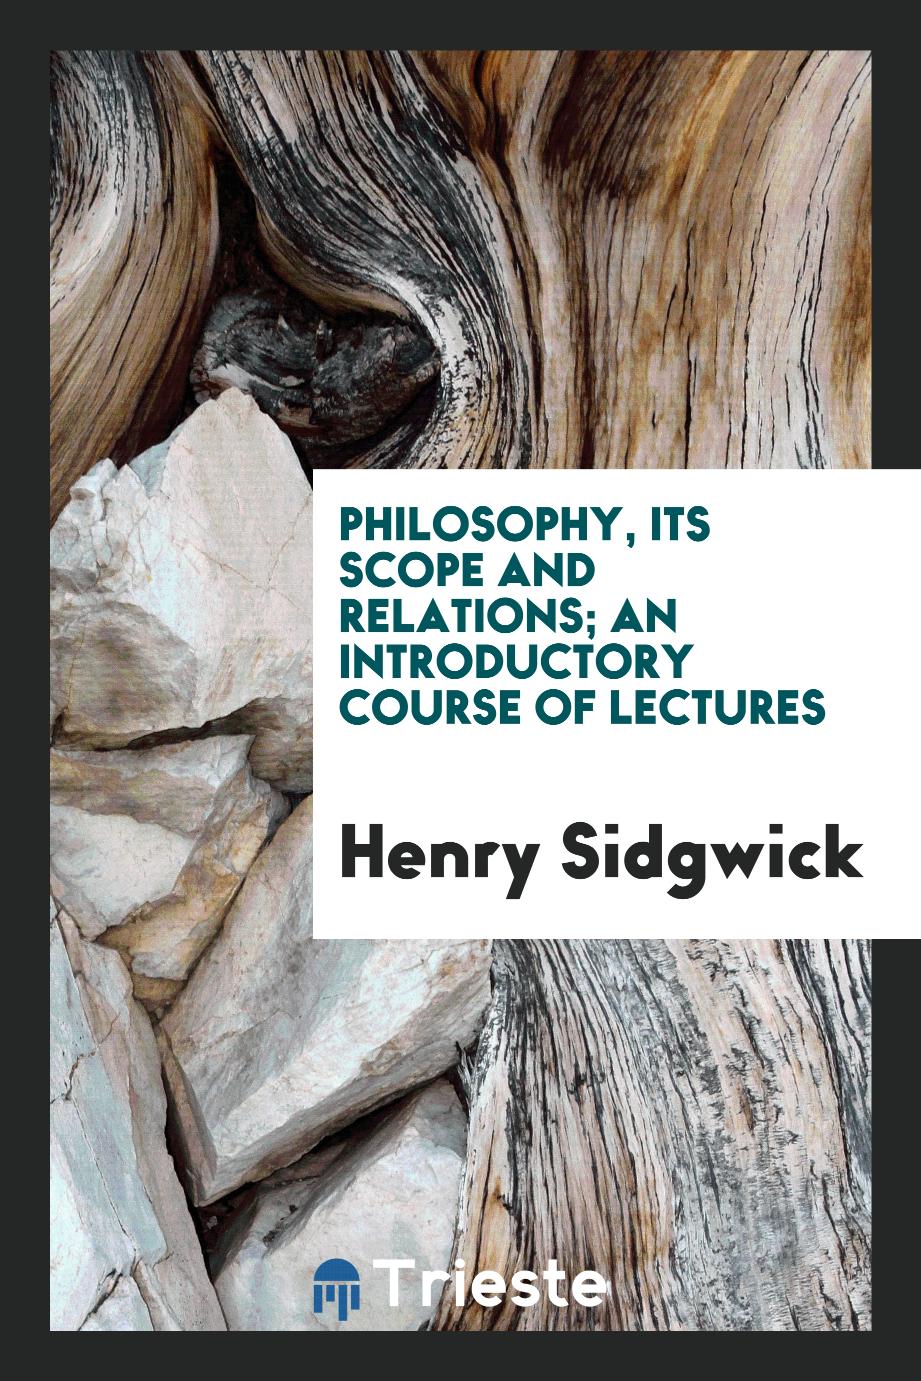 Philosophy, its scope and relations; an introductory course of lectures